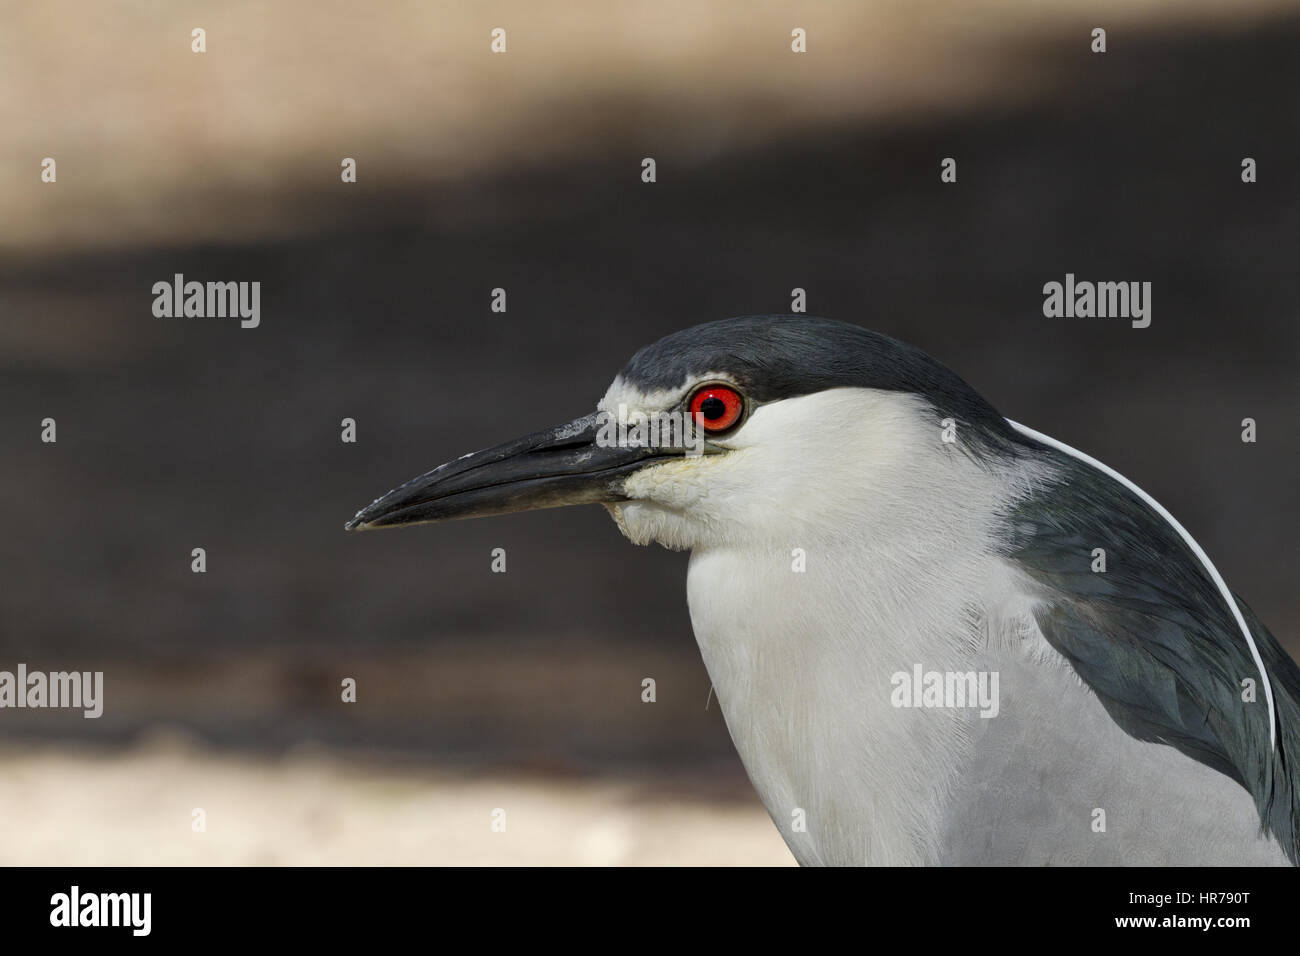 Close up portrait of black crowned night heron with bright red eyes.  Location is Reid Park in Tucson, Arizona, on February 24, 2017. Stock Photo